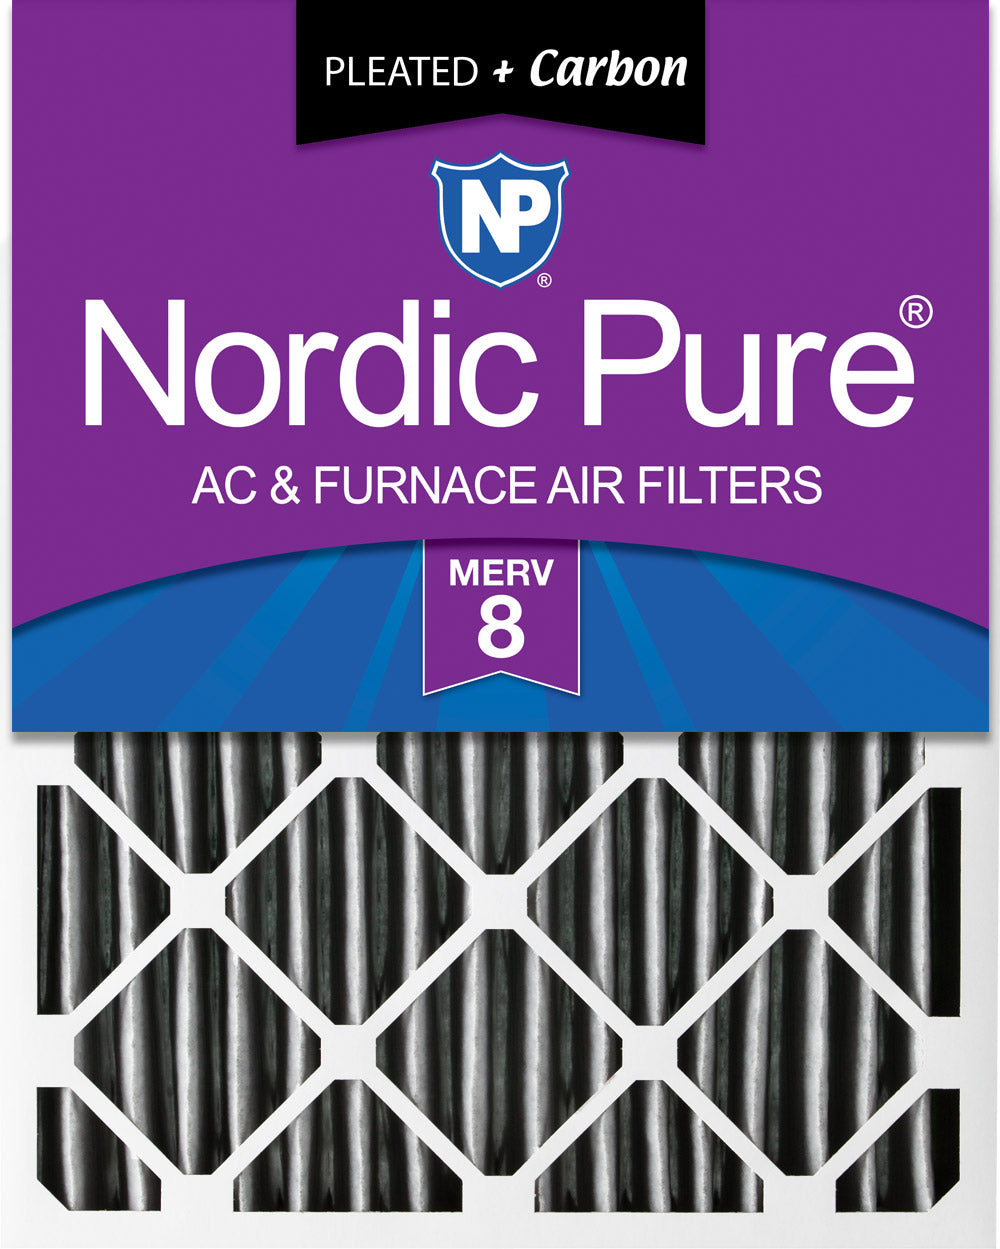 12x24x4 (3 5/8) Furnace Air Filters MERV 8 Pleated Plus Carbon